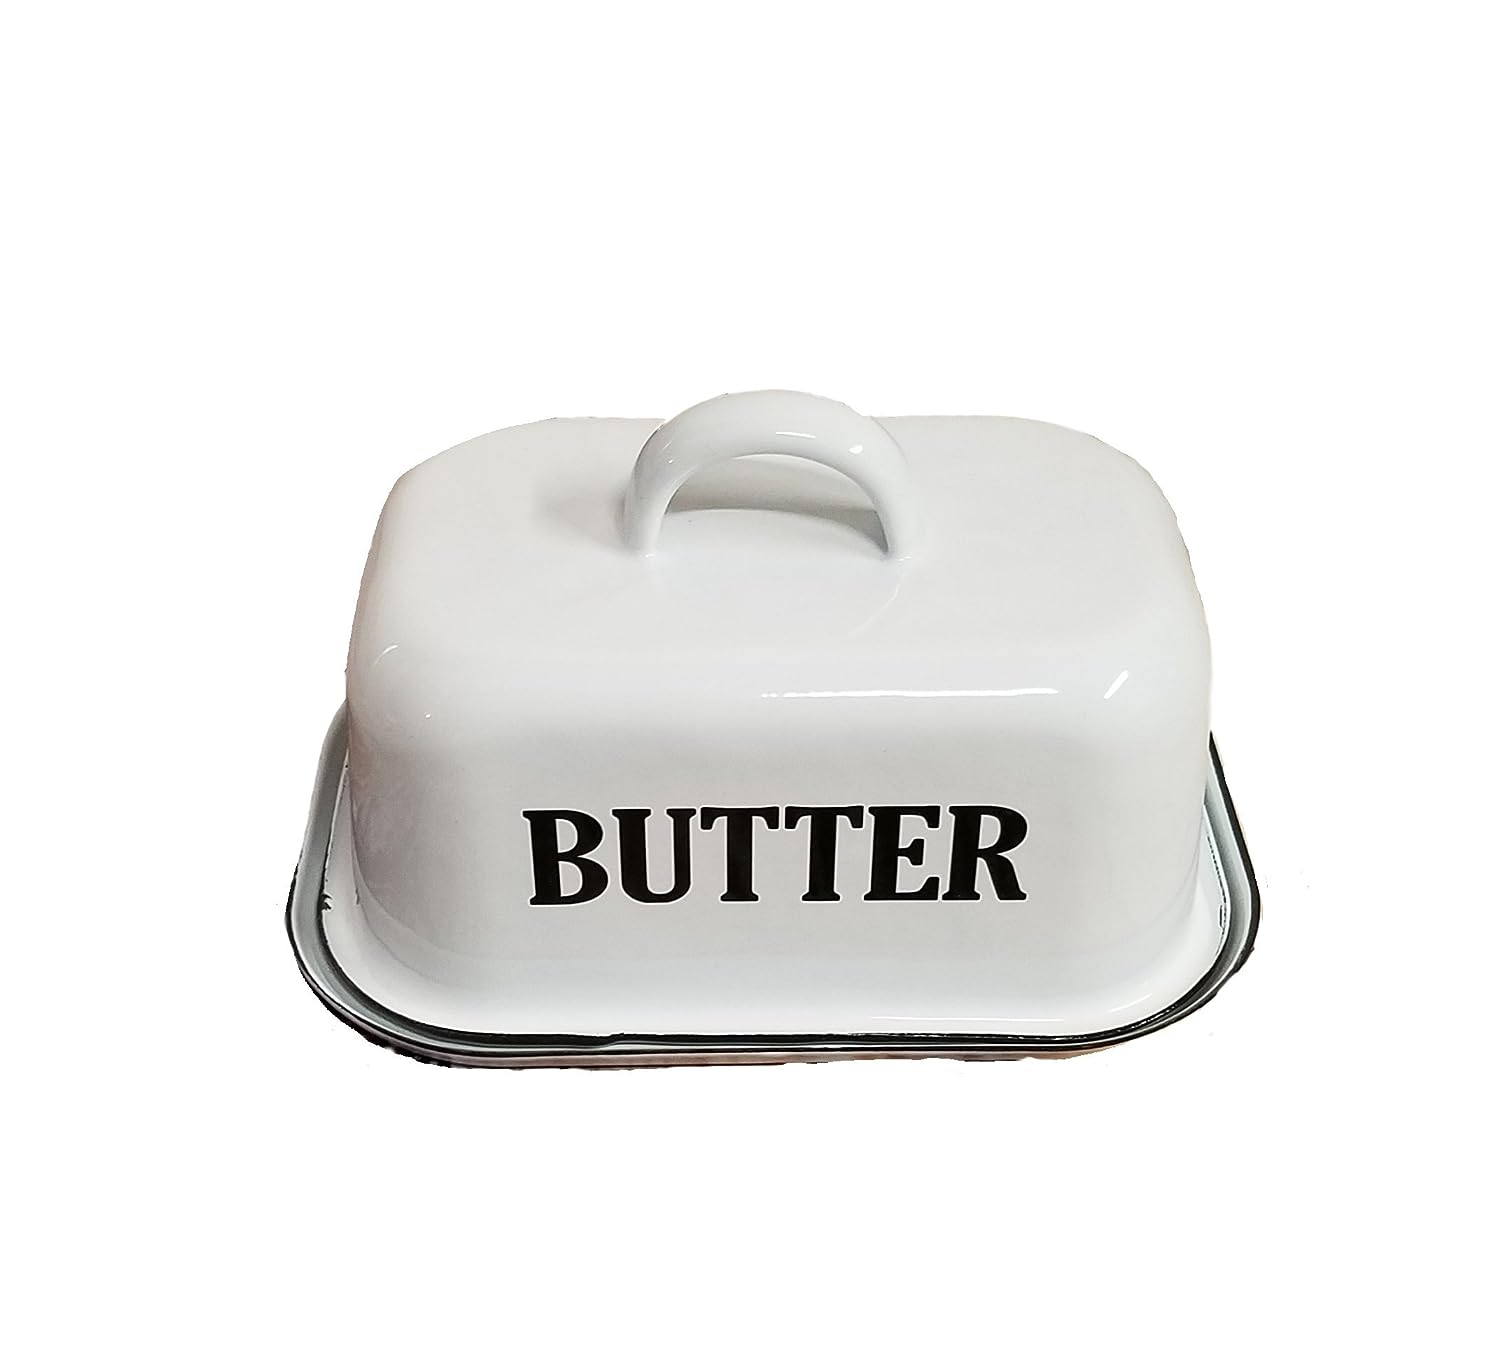 porcelain butter dish with lid | Reasonable price, great purchase